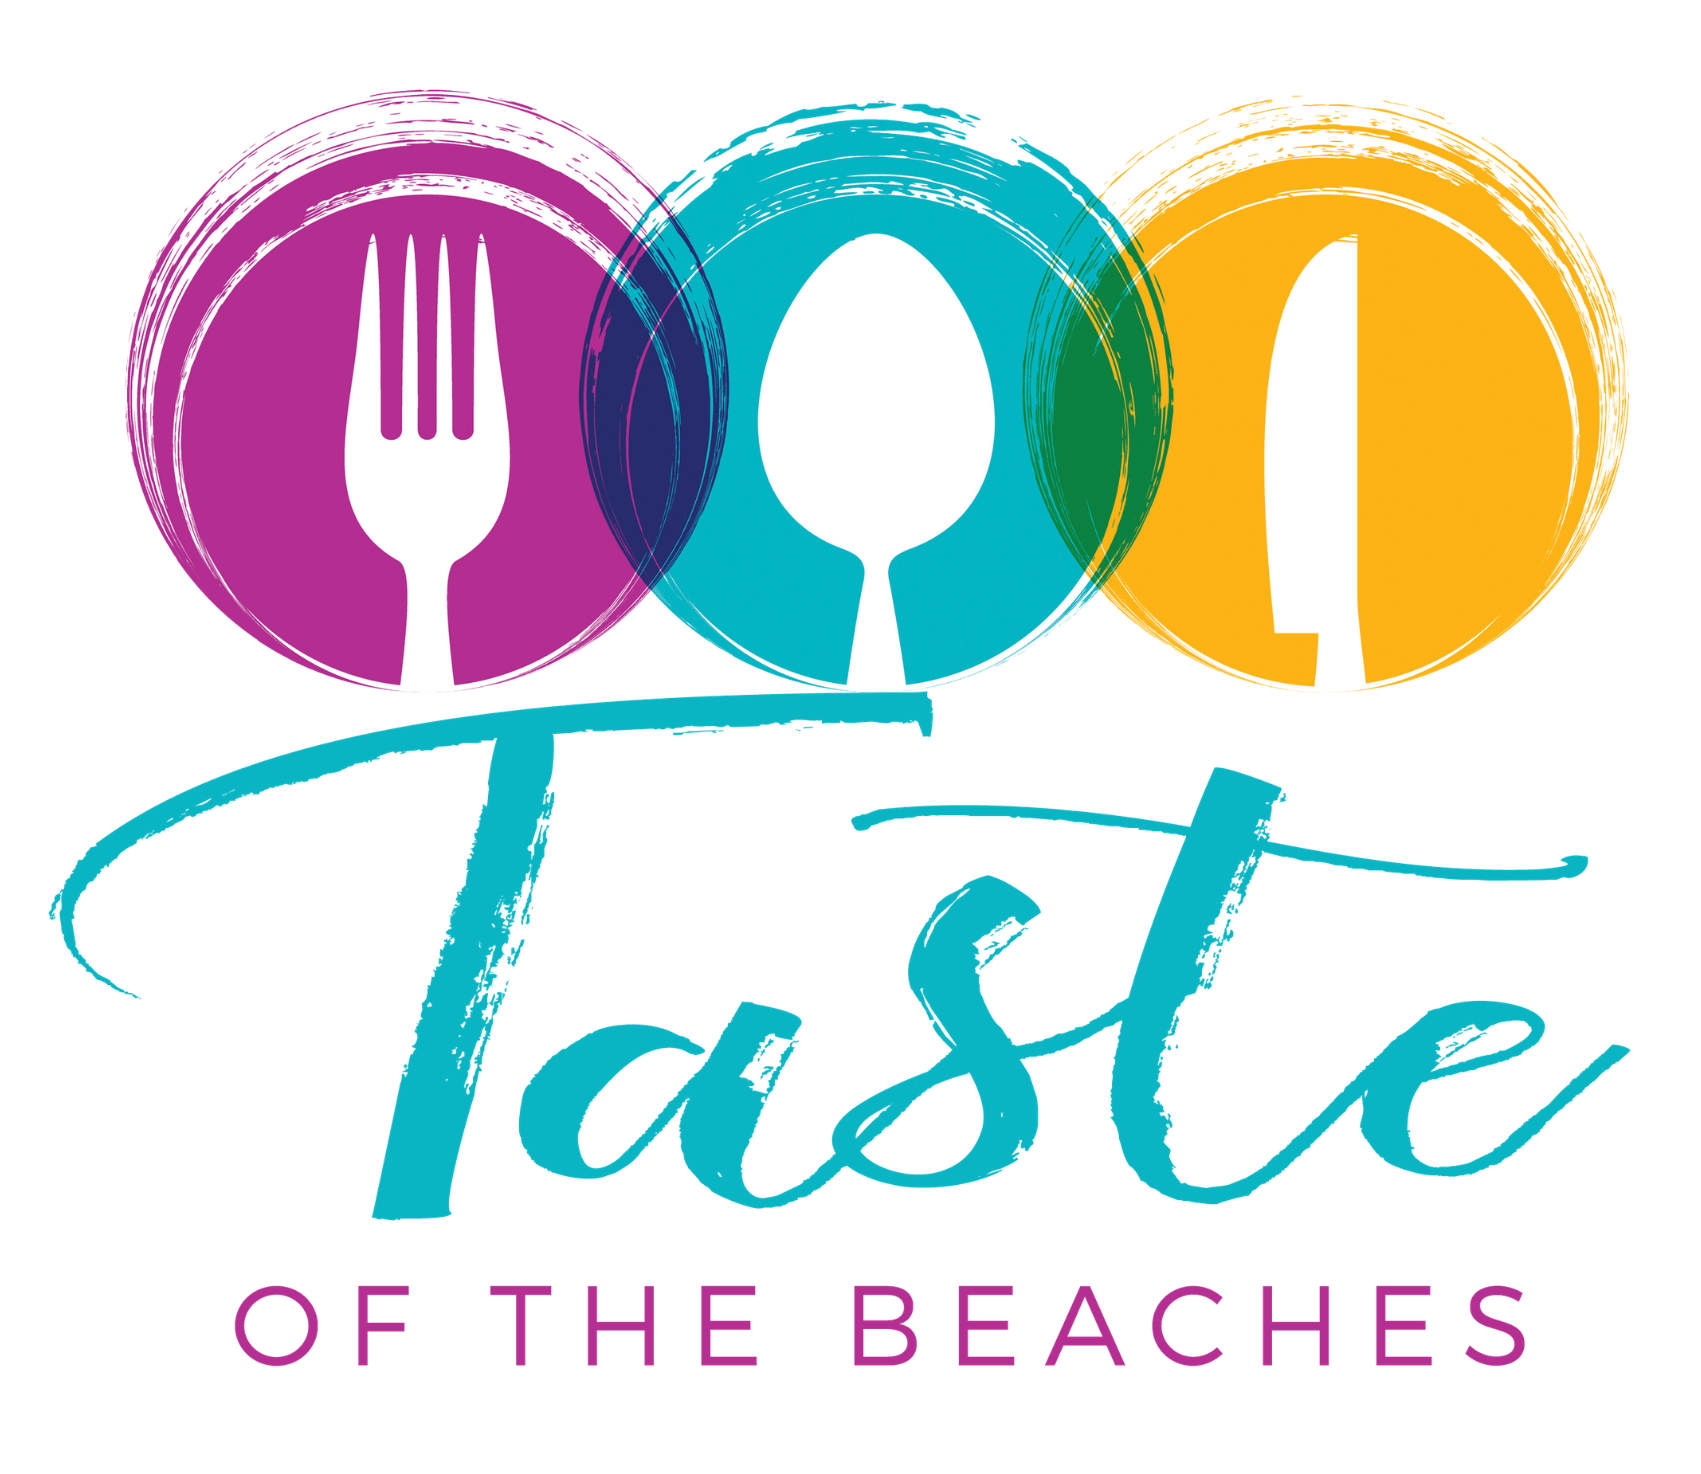 Taste of the Beaches Tampa Bay Beaches Chamber of Commerce